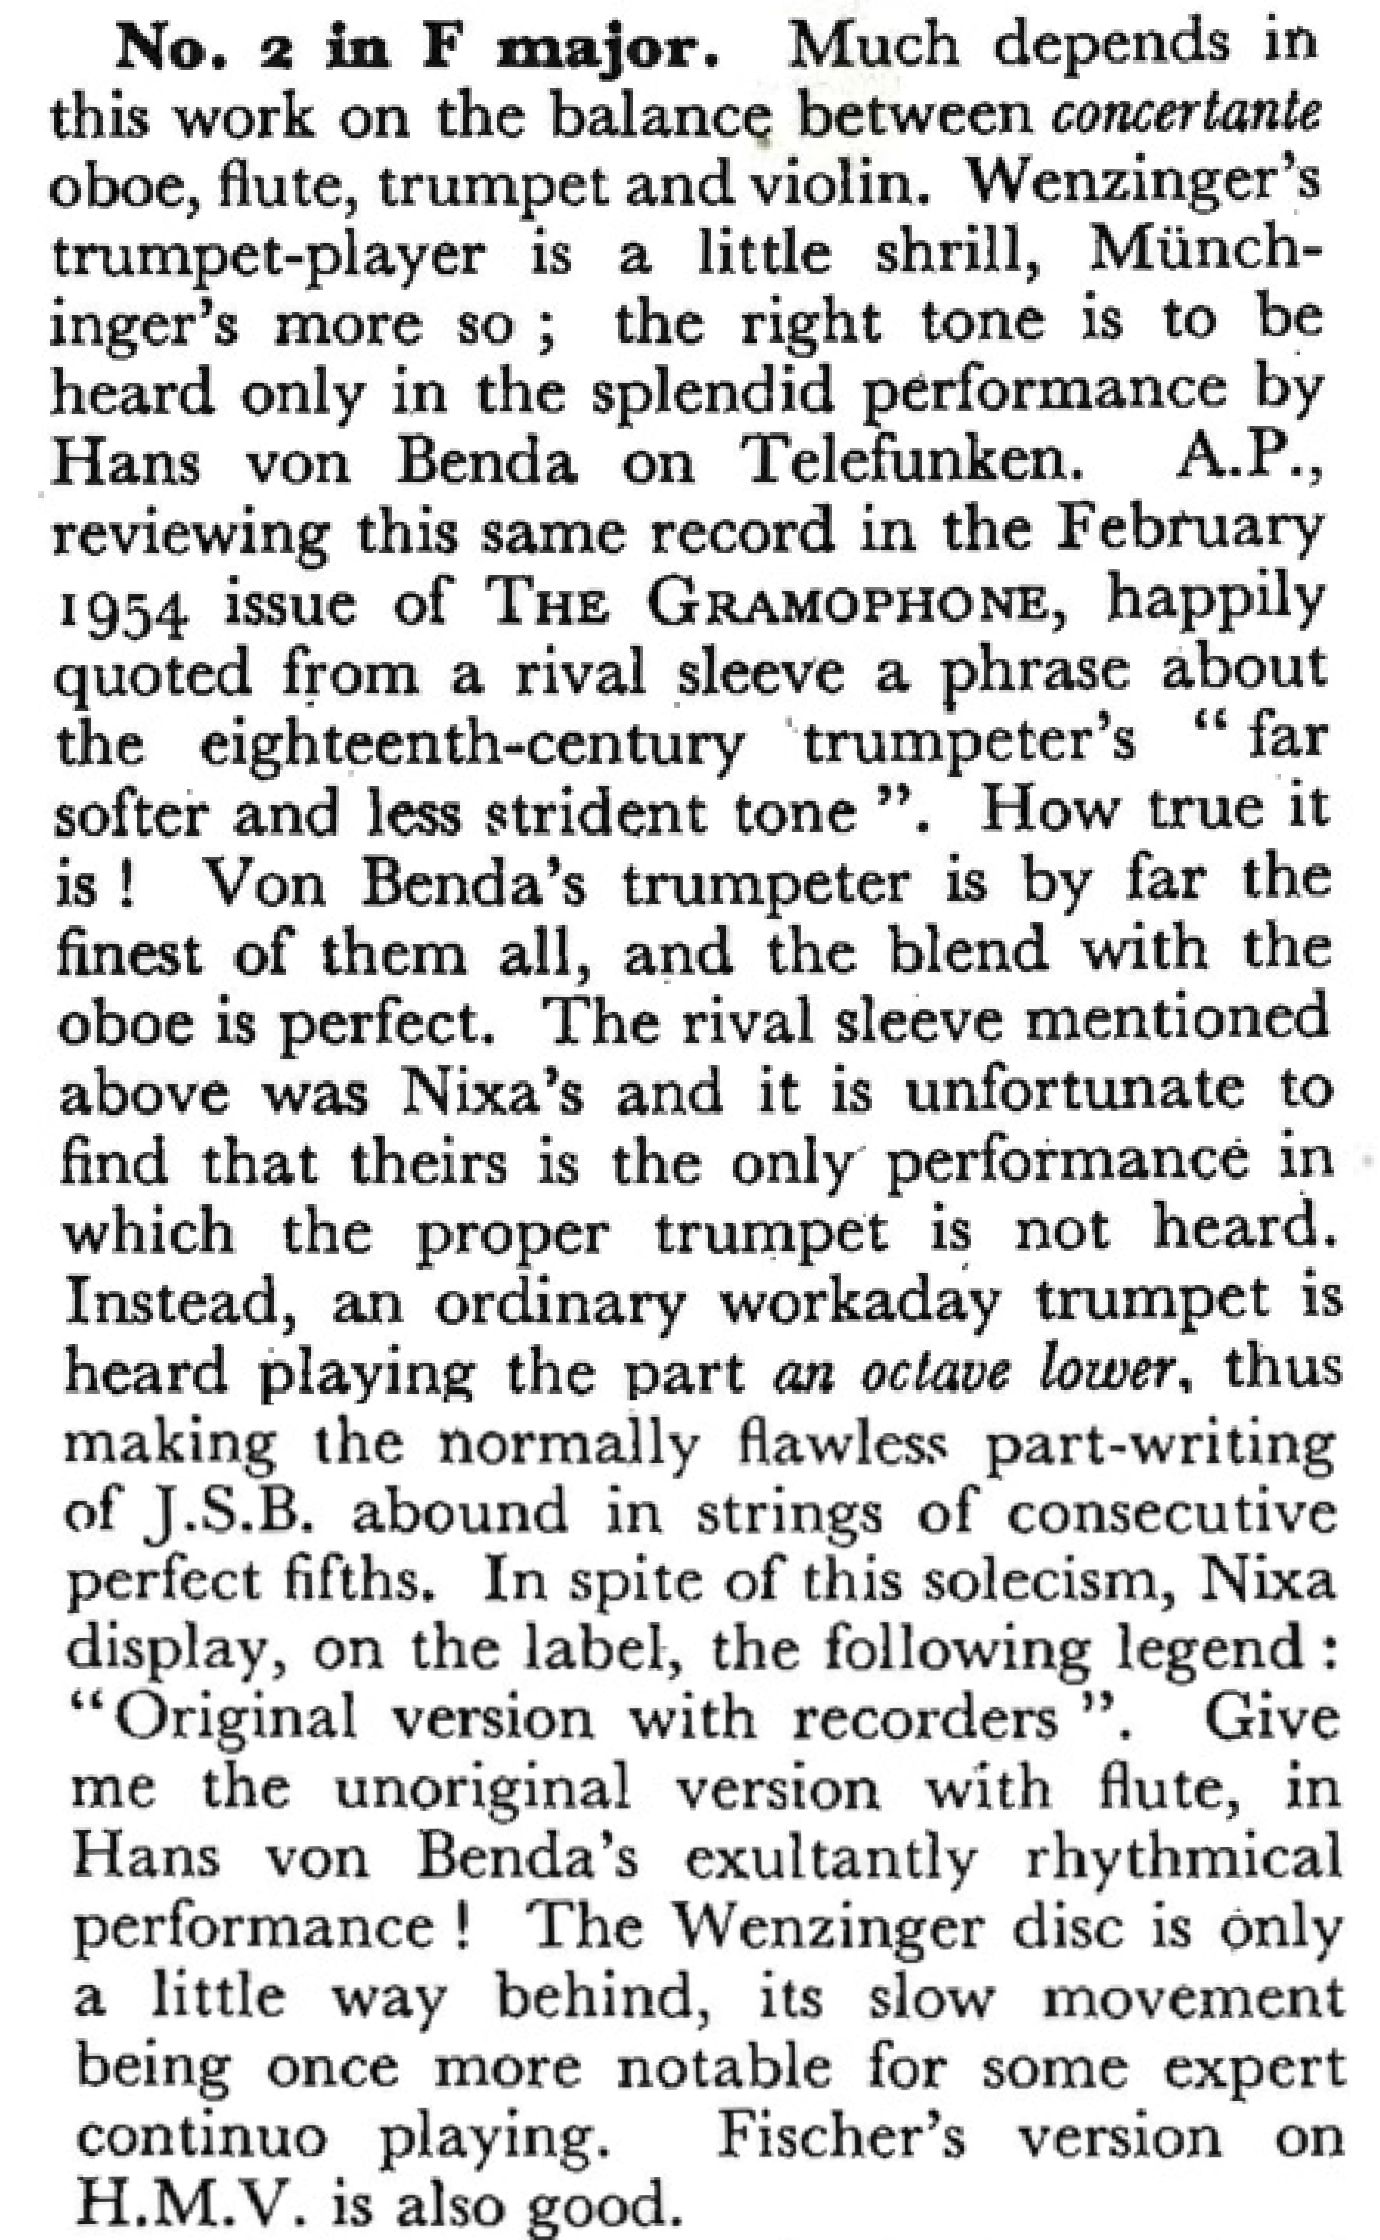 The Gramophone April 1955 page 485 486 Extrait